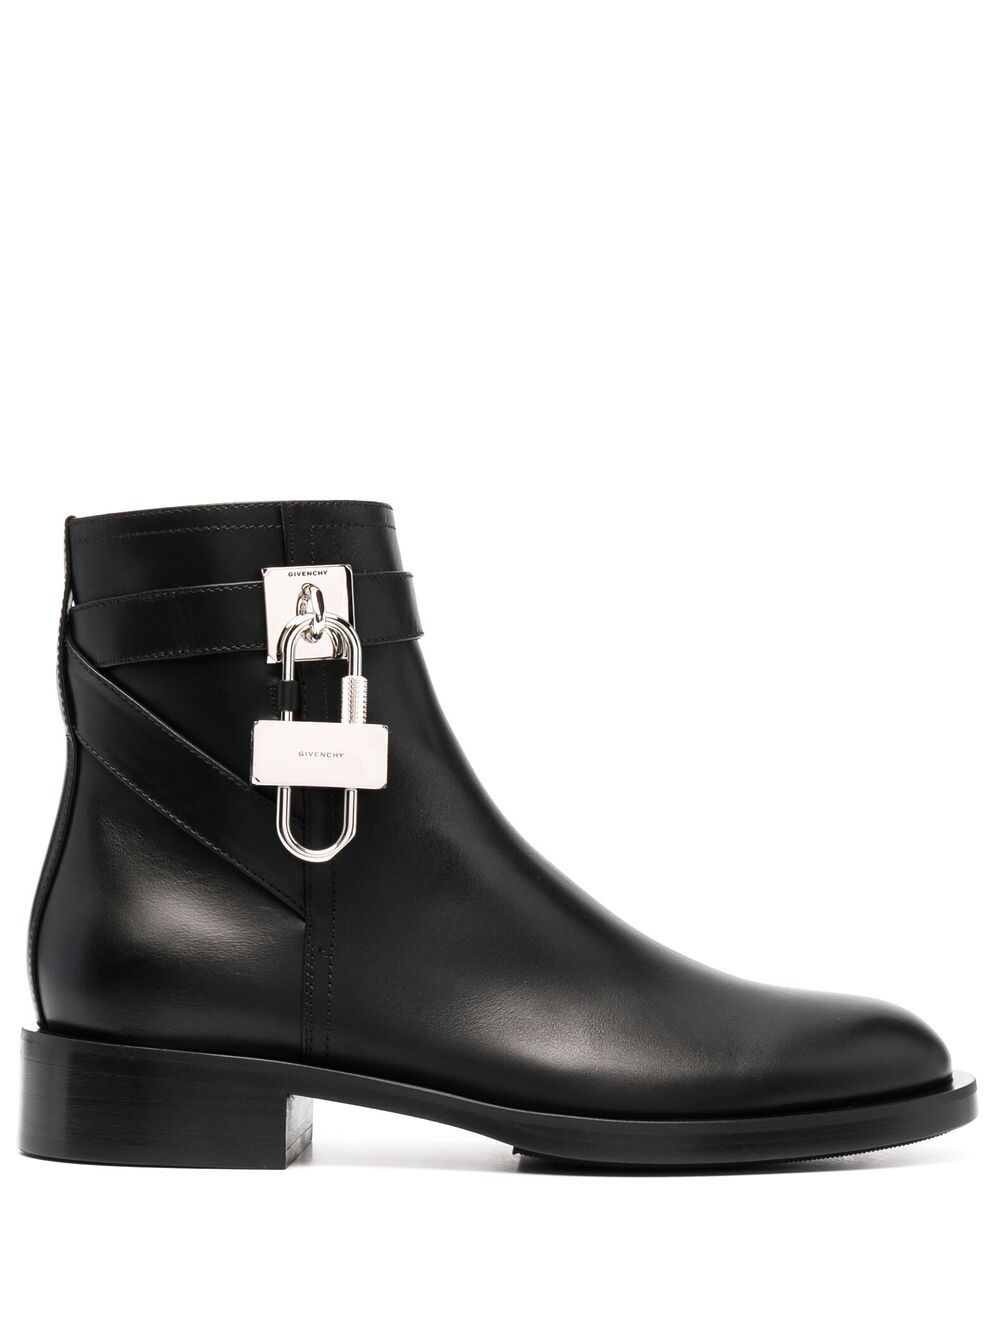 Lock Leather Ankle Boots дамски обувки Givenchy 841097433_36